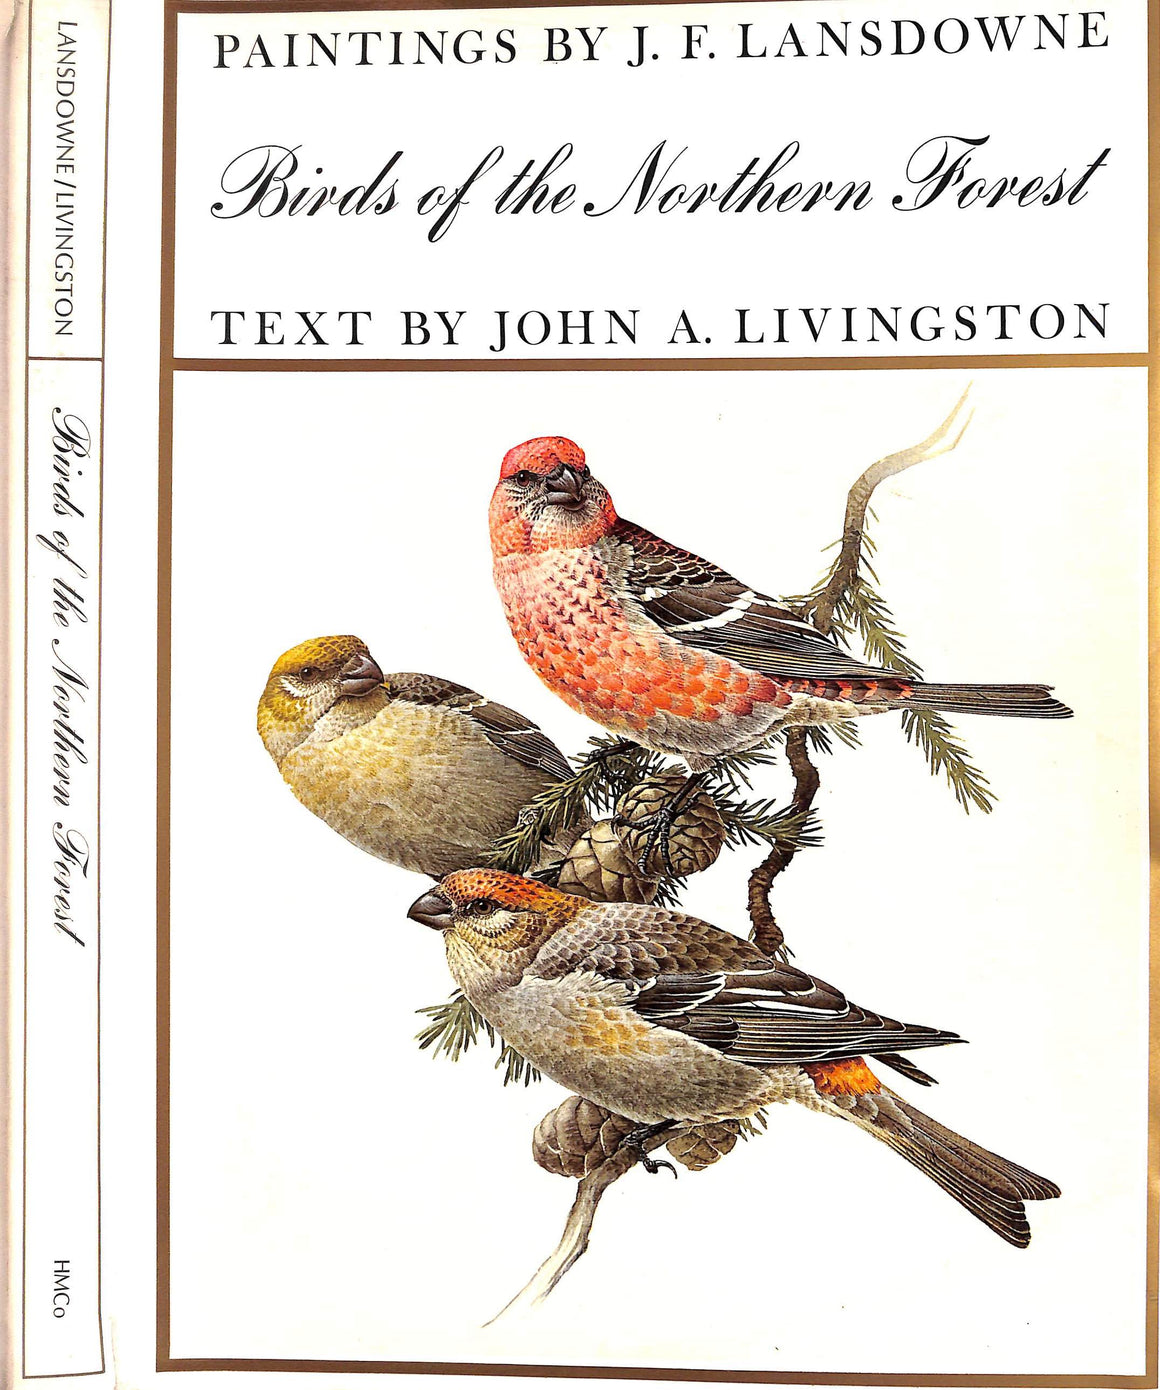 "Birds Of The Northern Forest" 1966 LIVINGSTON, John A. [text by]